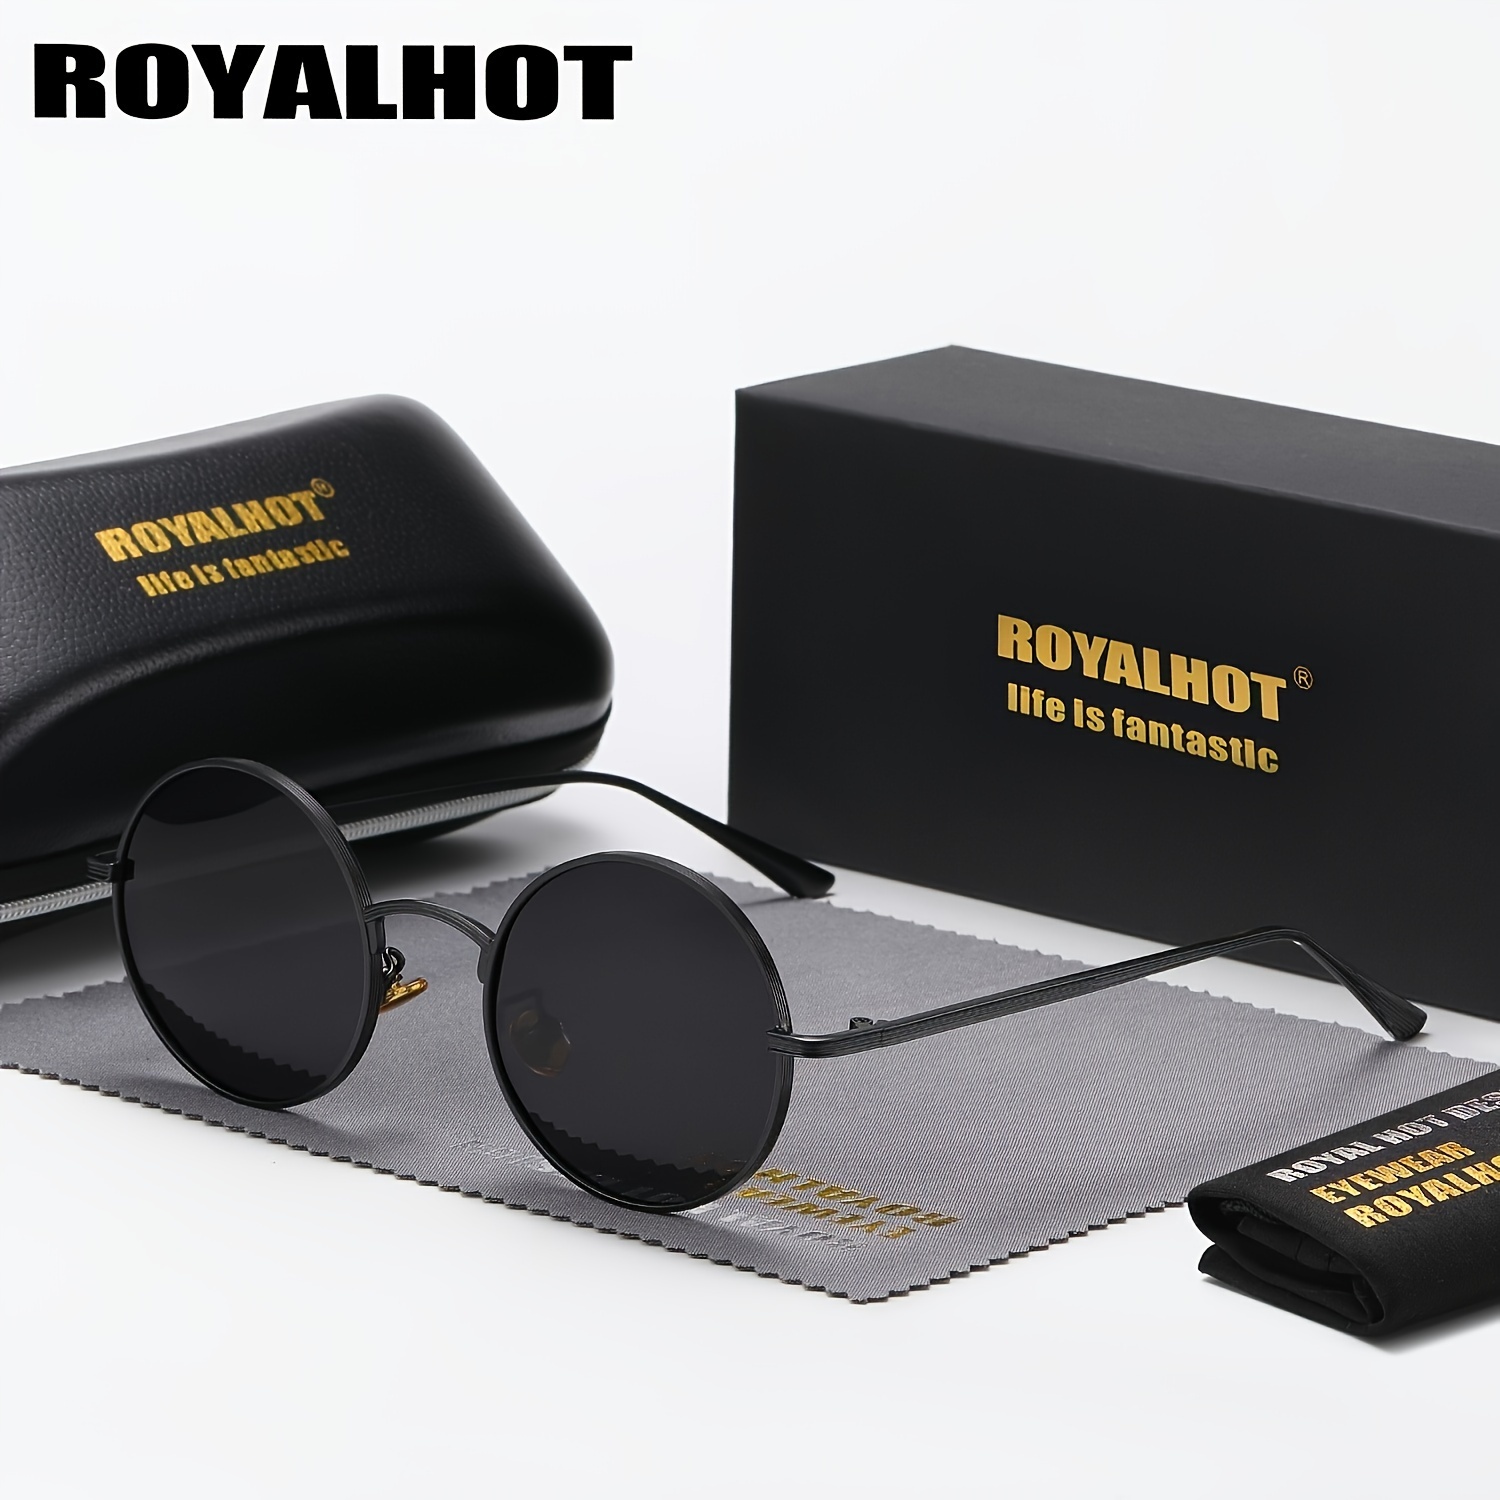 

Royalhot, Minimalist Fantasy Round Polarized Glasses, Retro Steampunk Style, For Men Women Casual Business Outdoor Sports Party Vacation Travel Driving Fishing Supply Photo Prop, Ideal Choice For Gift